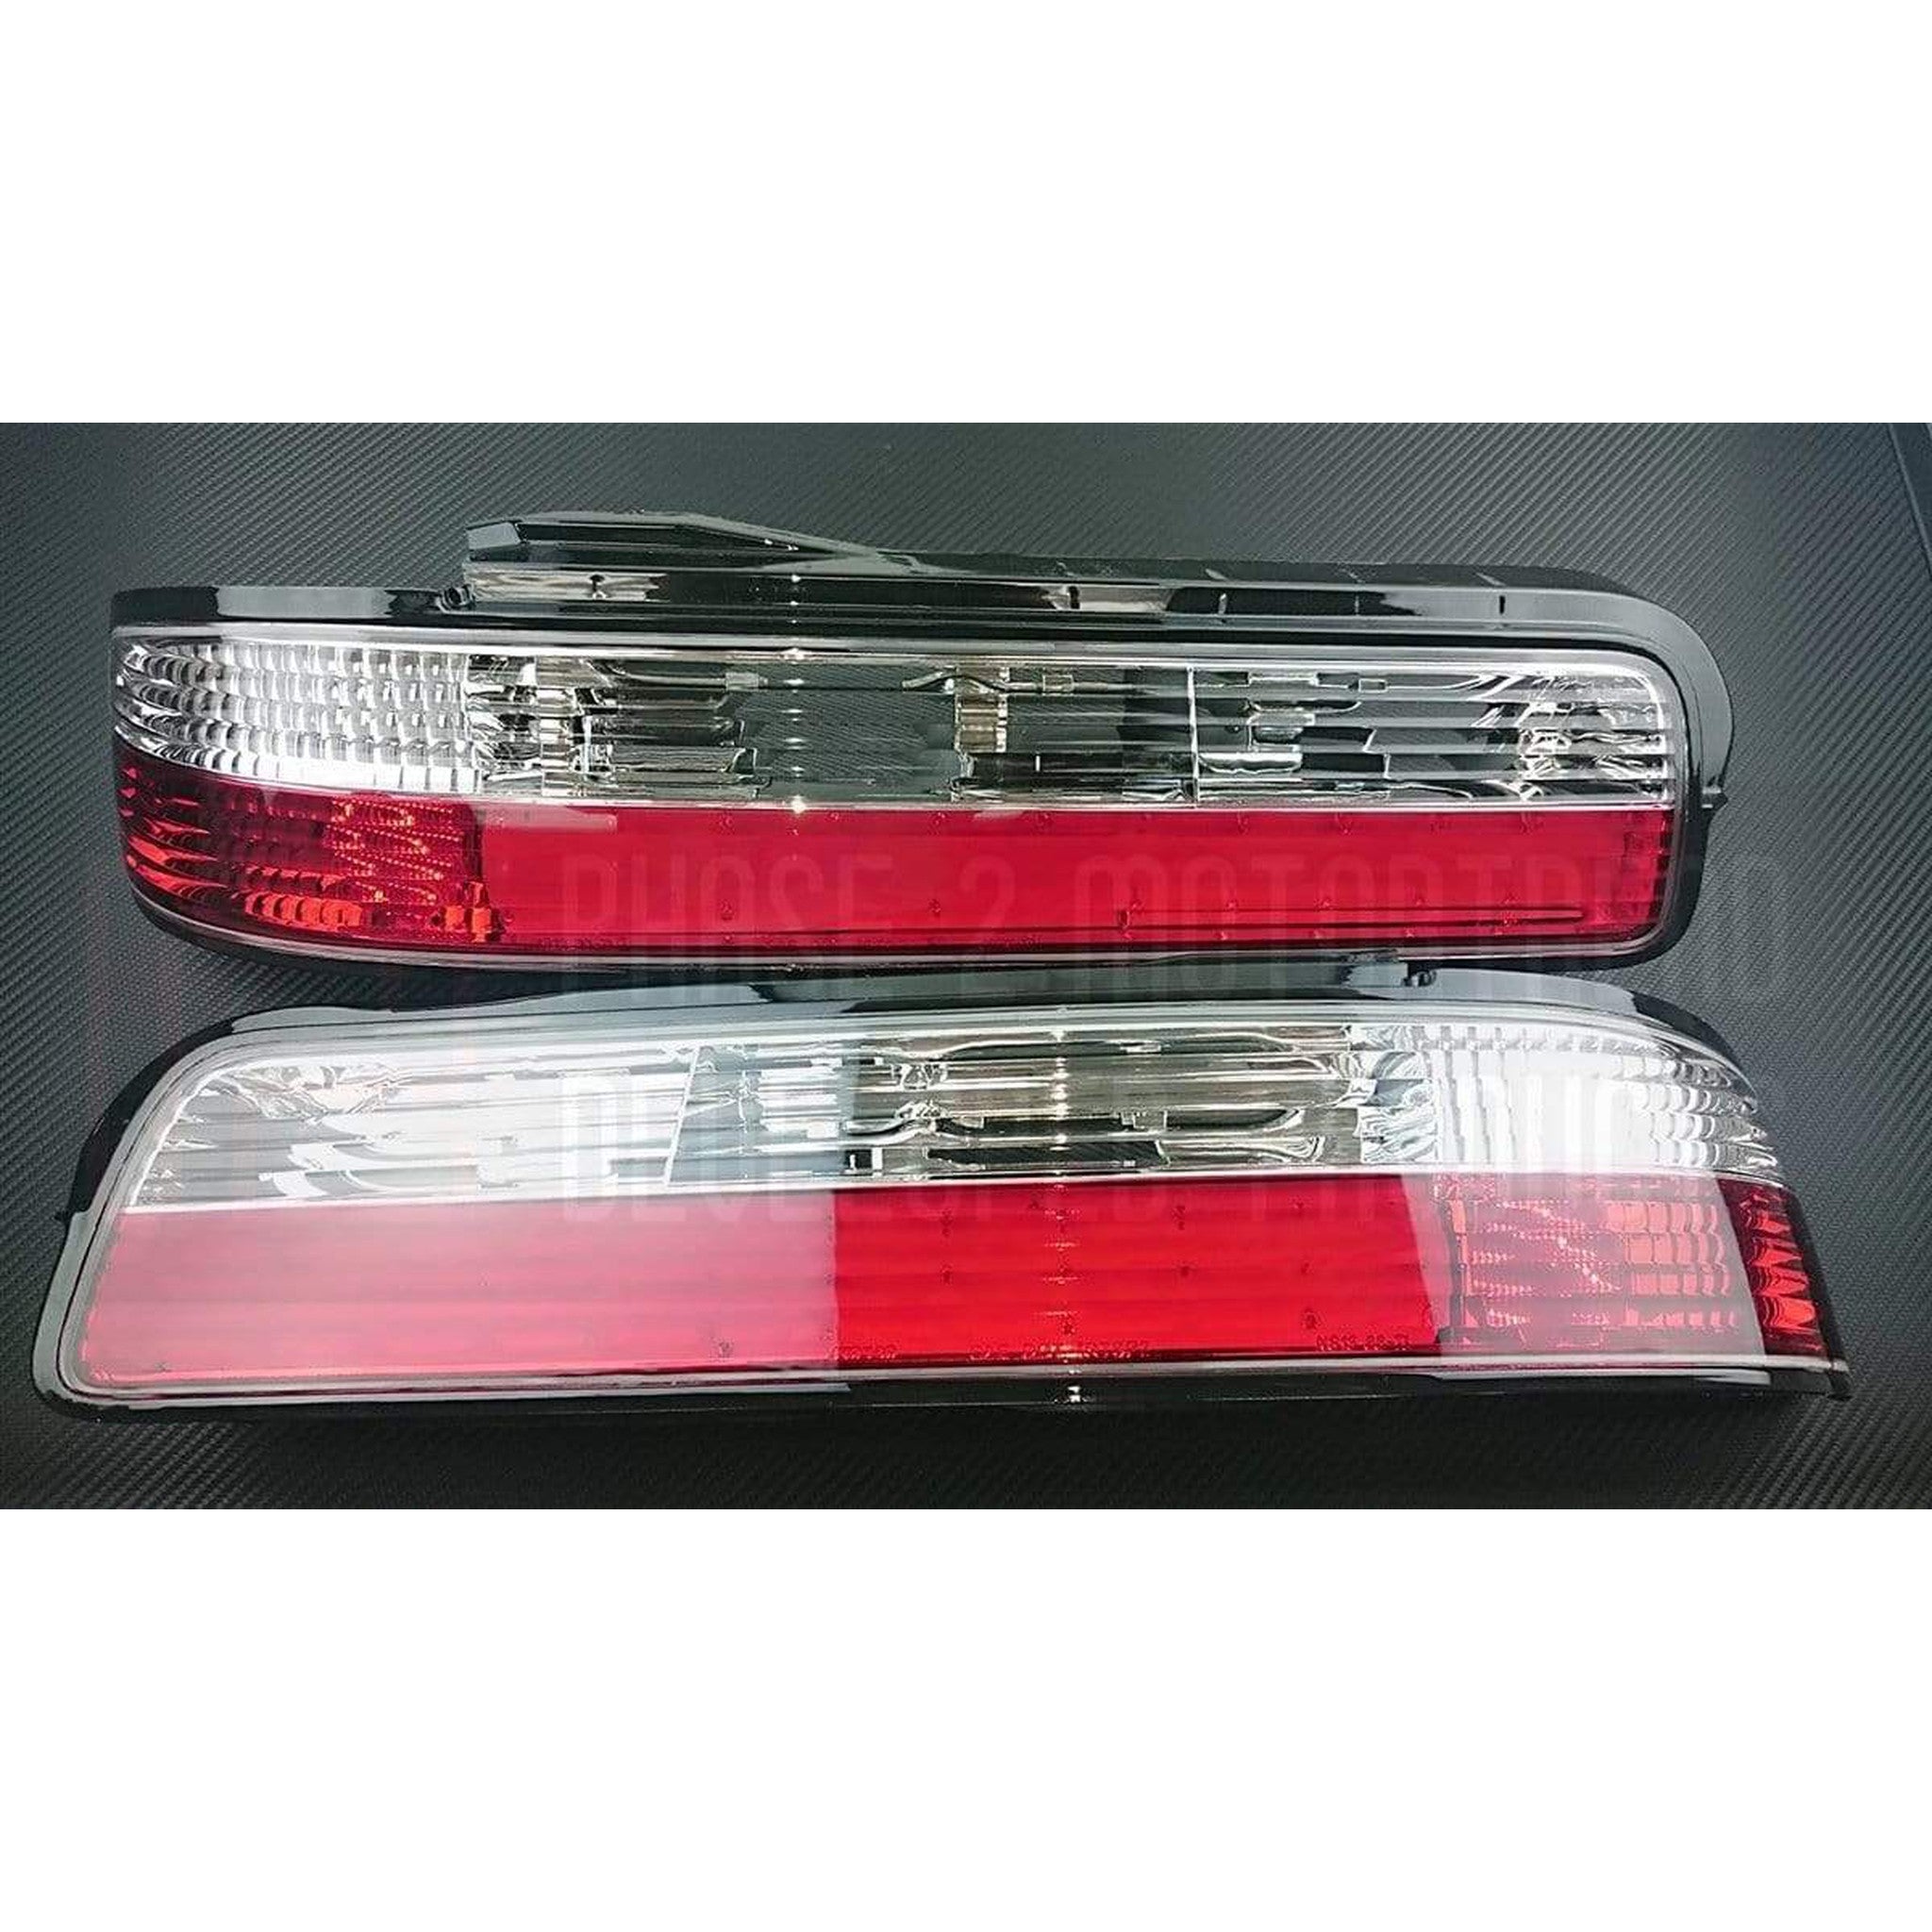 P2M Crystal Tail Light Kit Nissan 240sx Coupe 1989-1994 – Import Image Racing